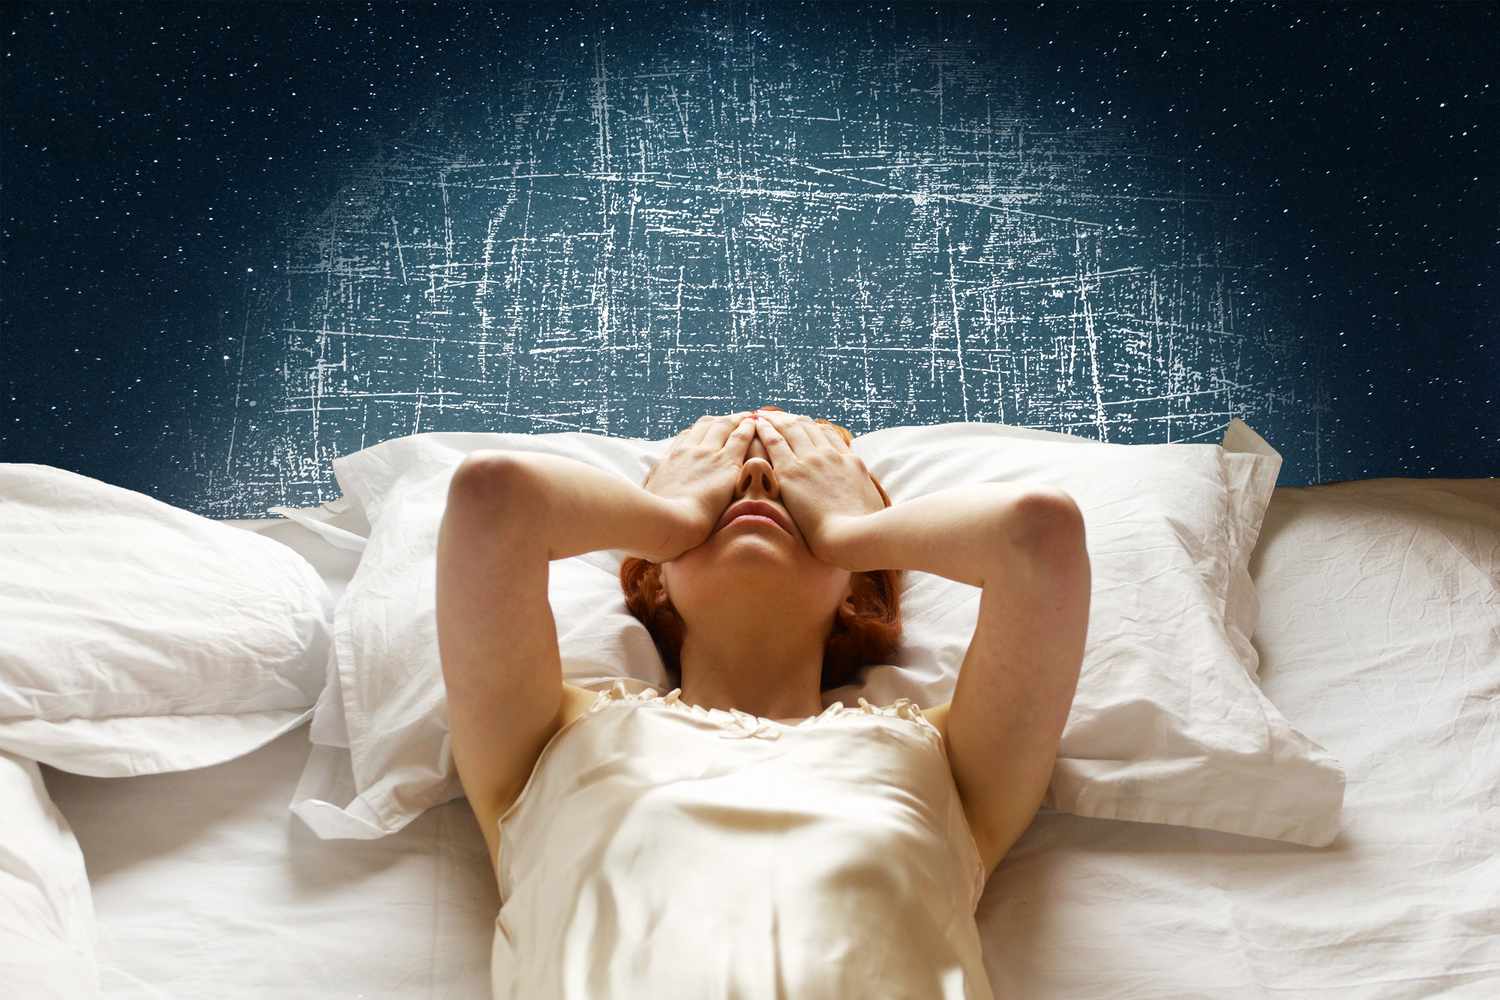 A woman laying in bed expressing discomfort with a night sky in the background and scratches